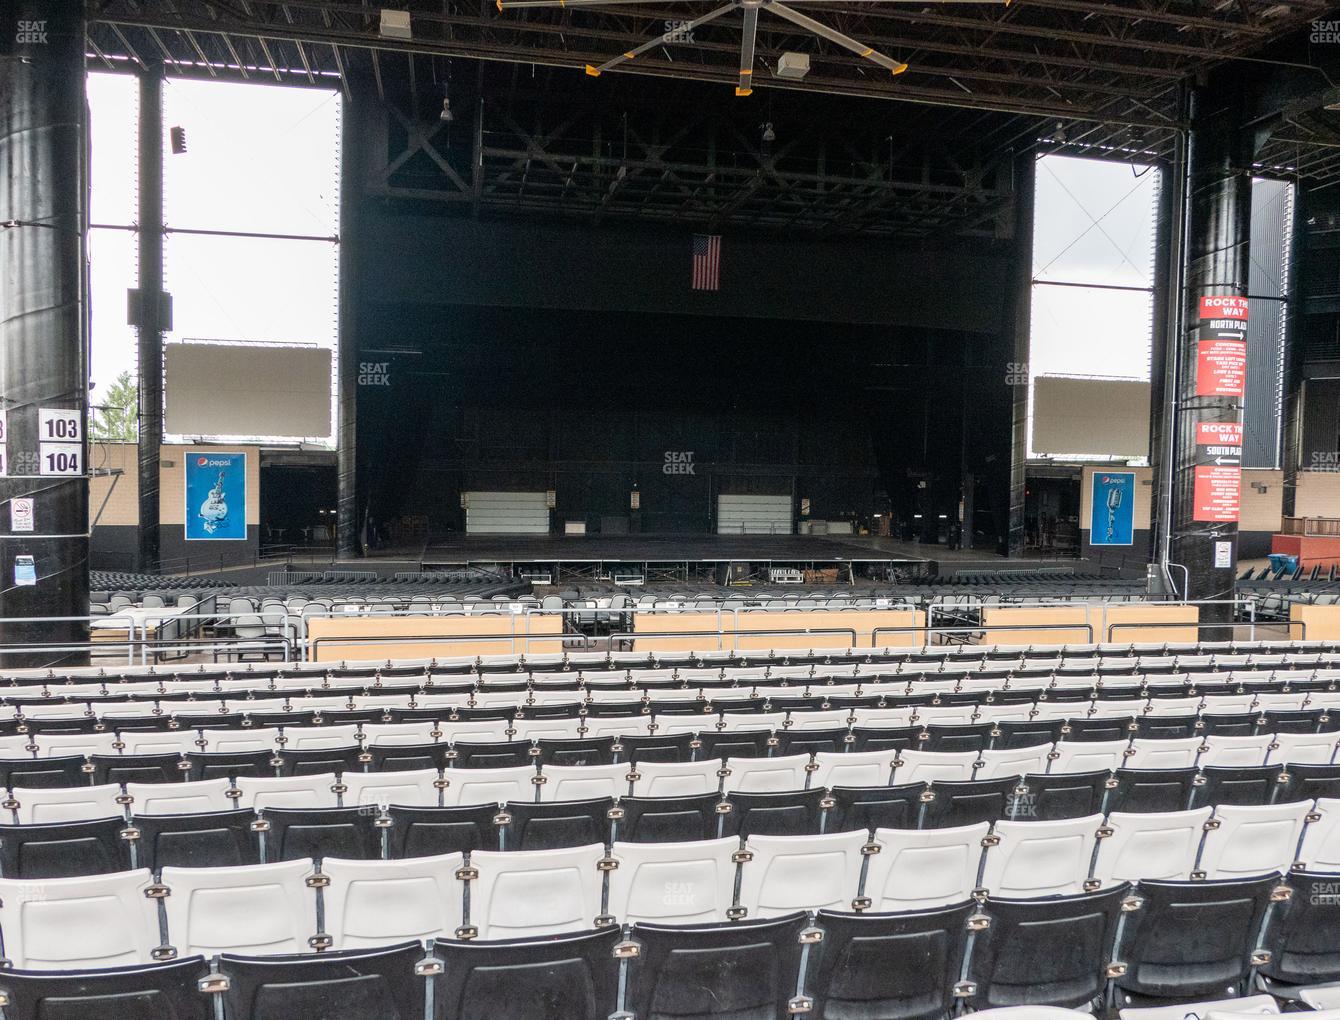 hollywood casino amphitheater 2020 schedule